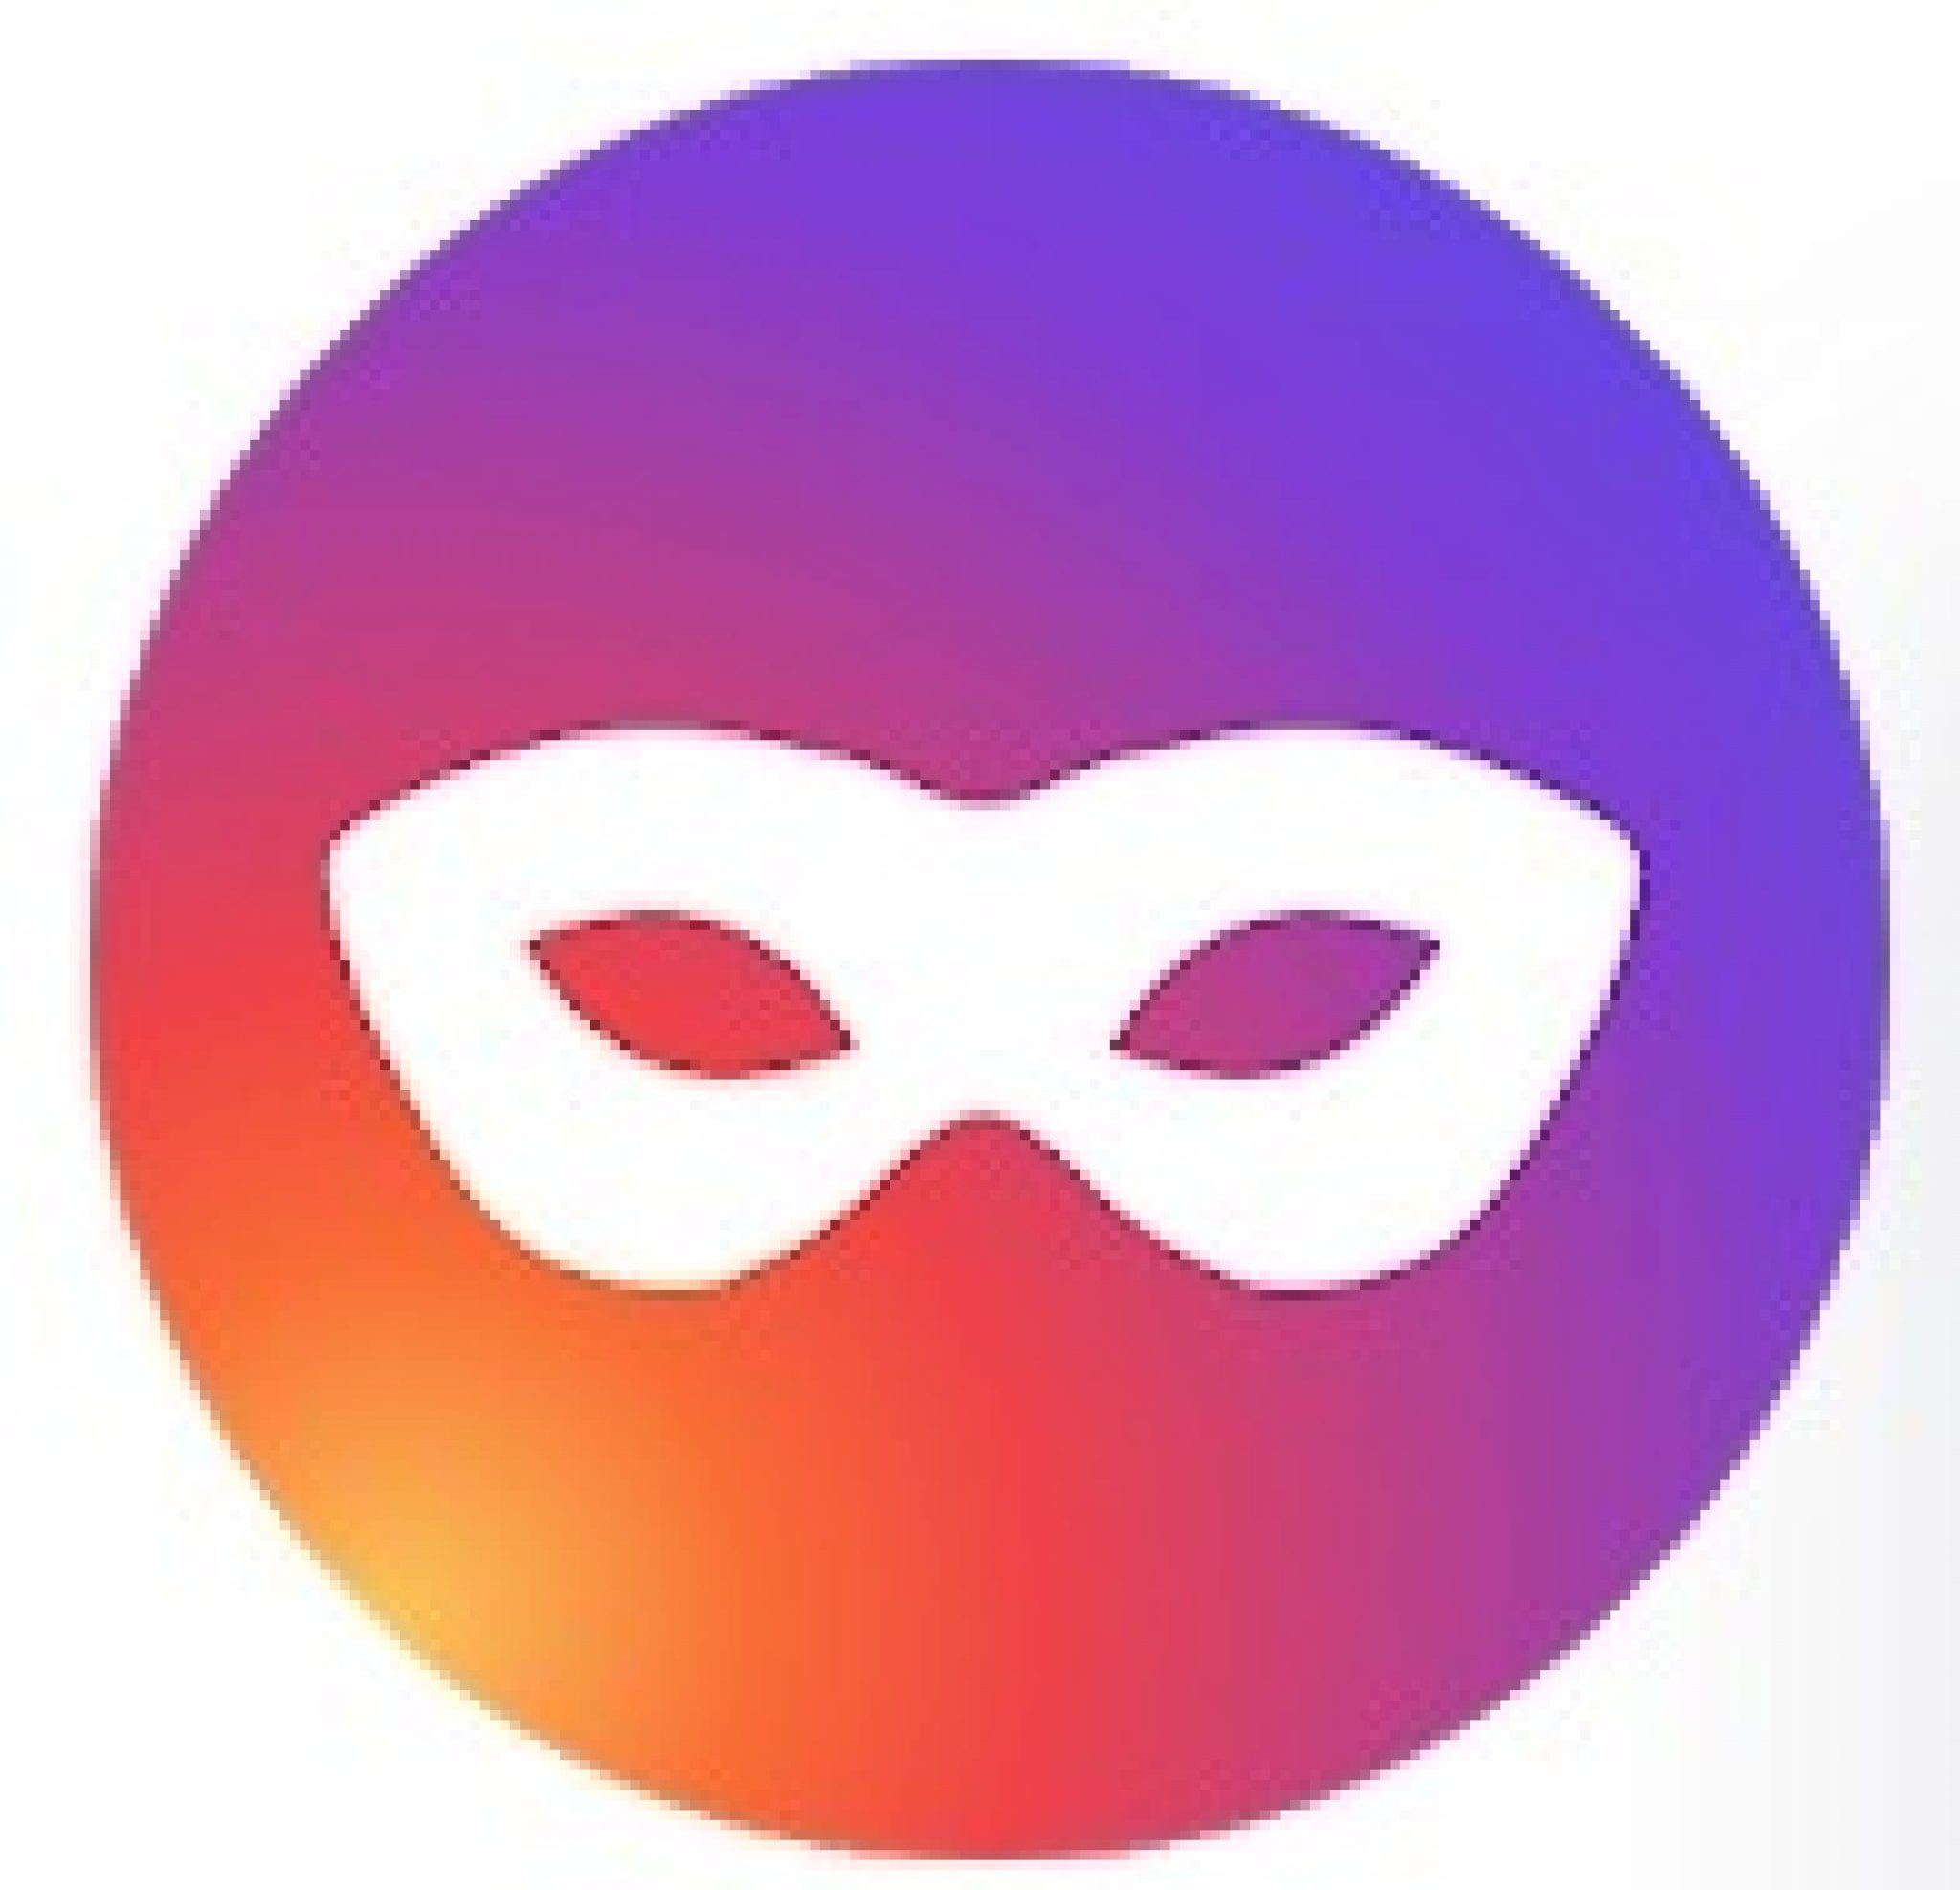 anonymously instagram story viewer by istaunch